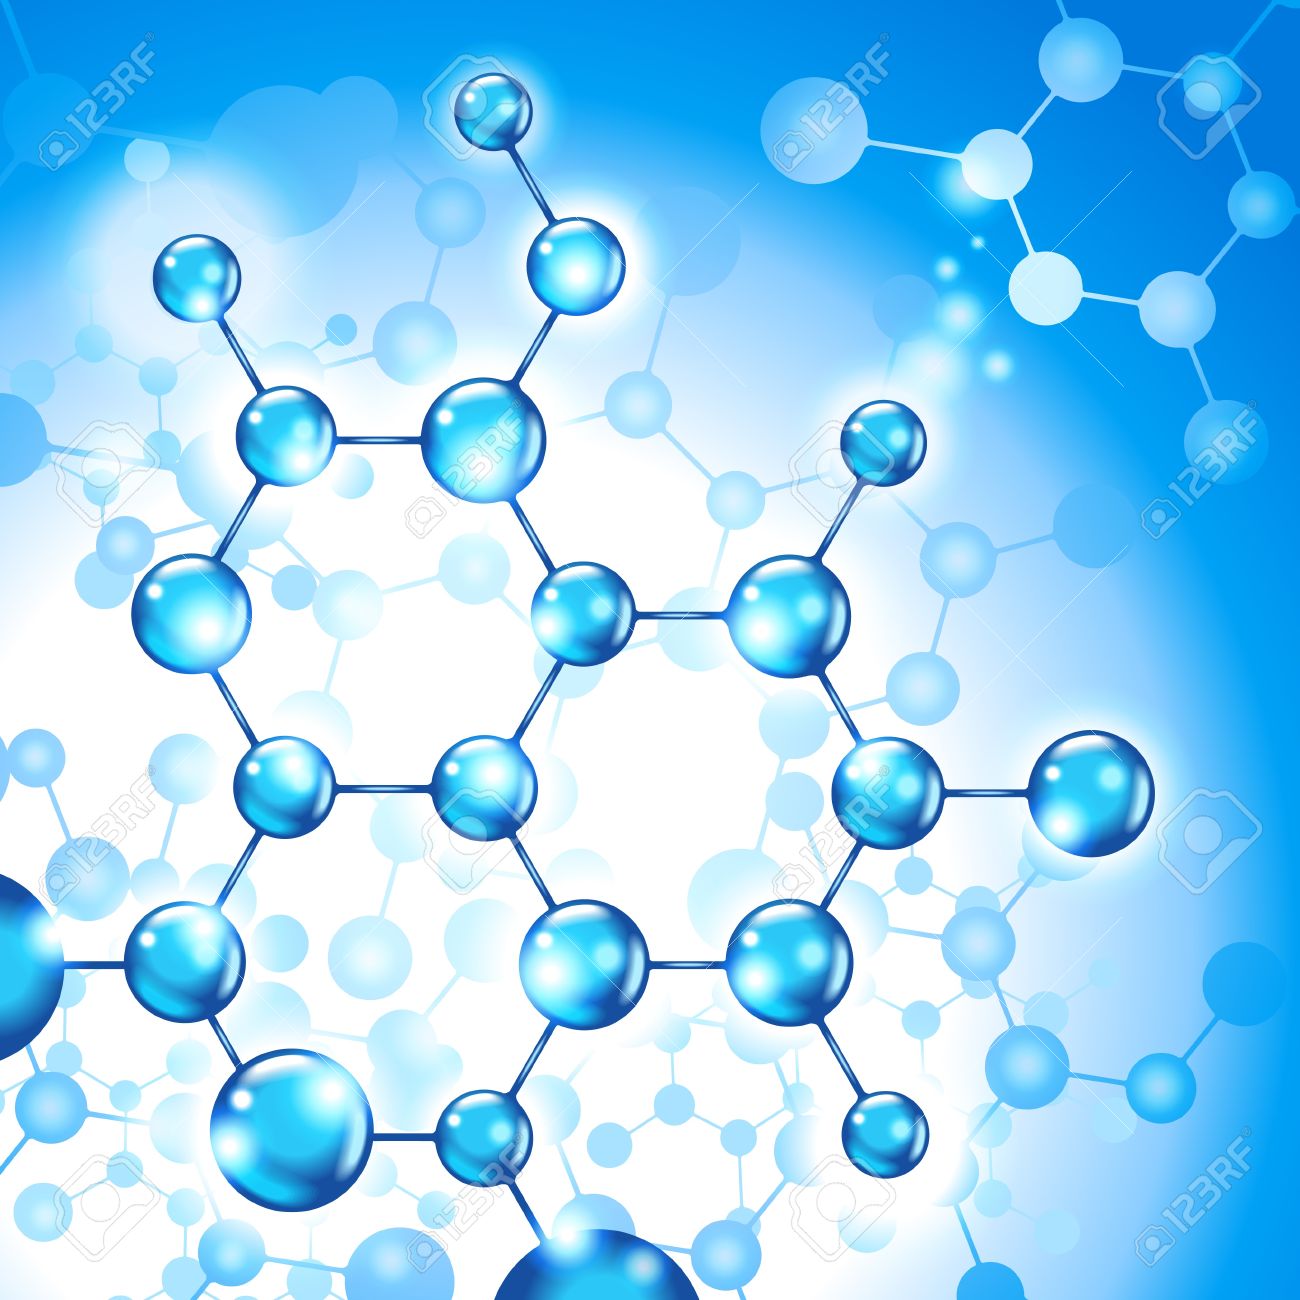 17807034-abstract-background-consisting-of-DNA-molecules-Stock-Vector